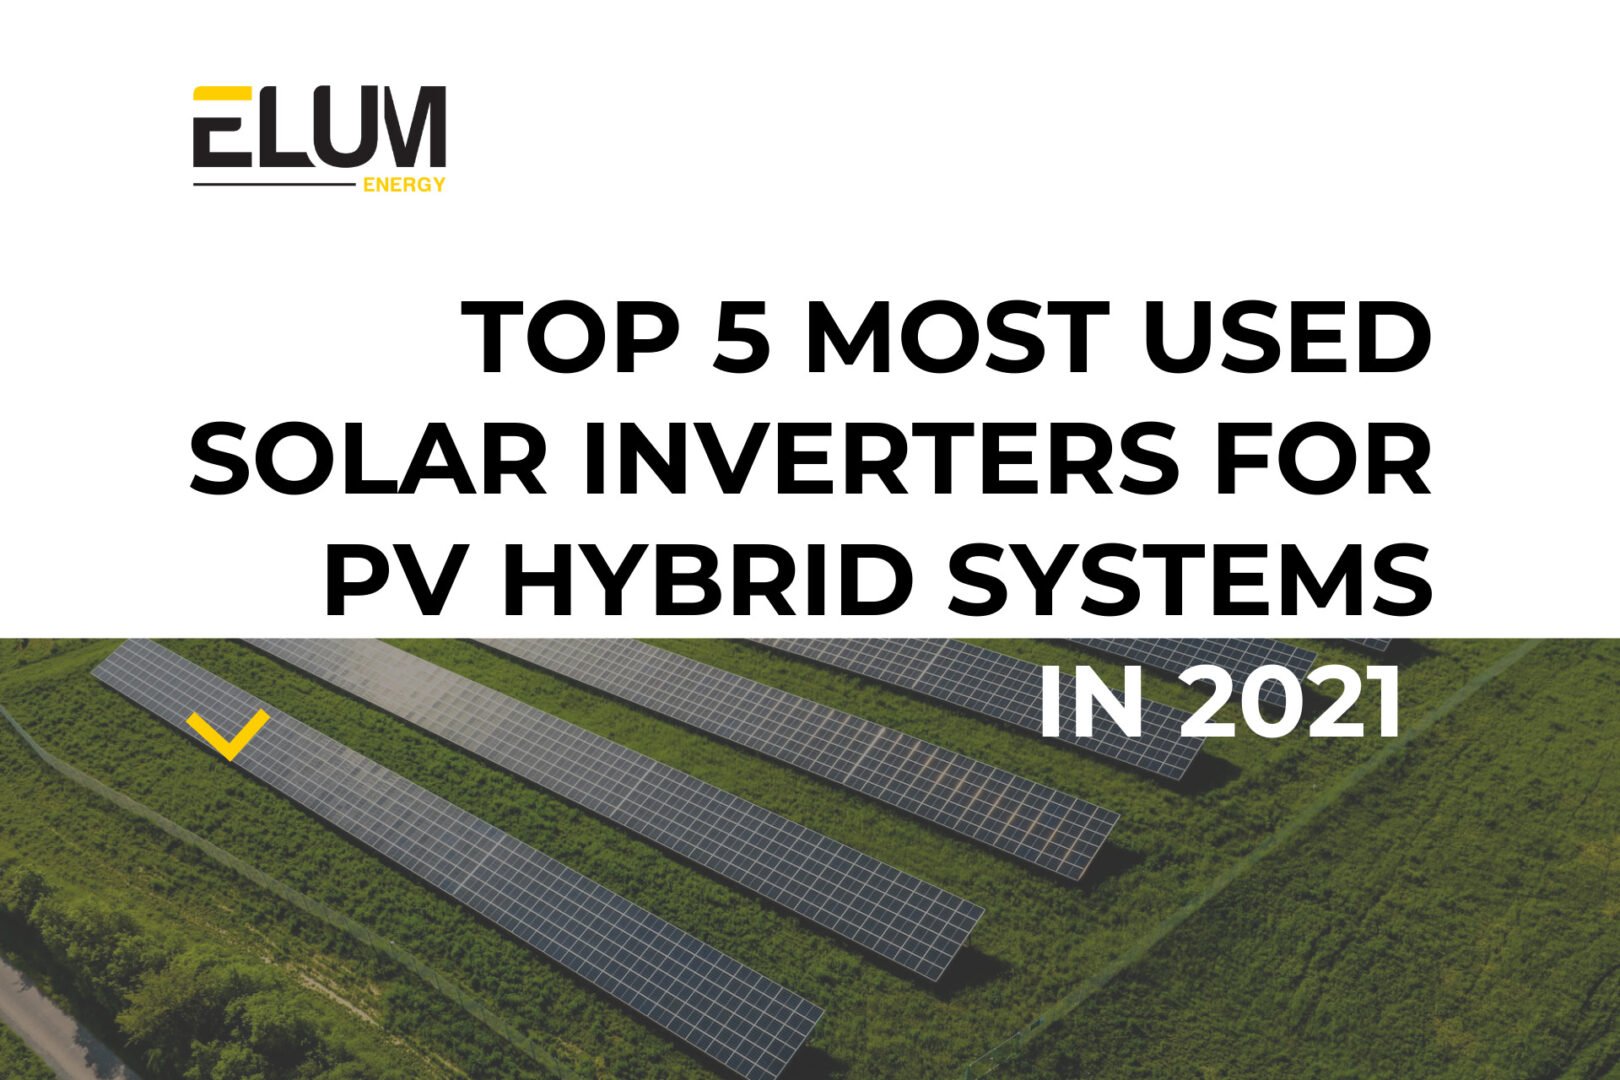 Top 5 most used solar inverters for PV hybrid systems in 2021